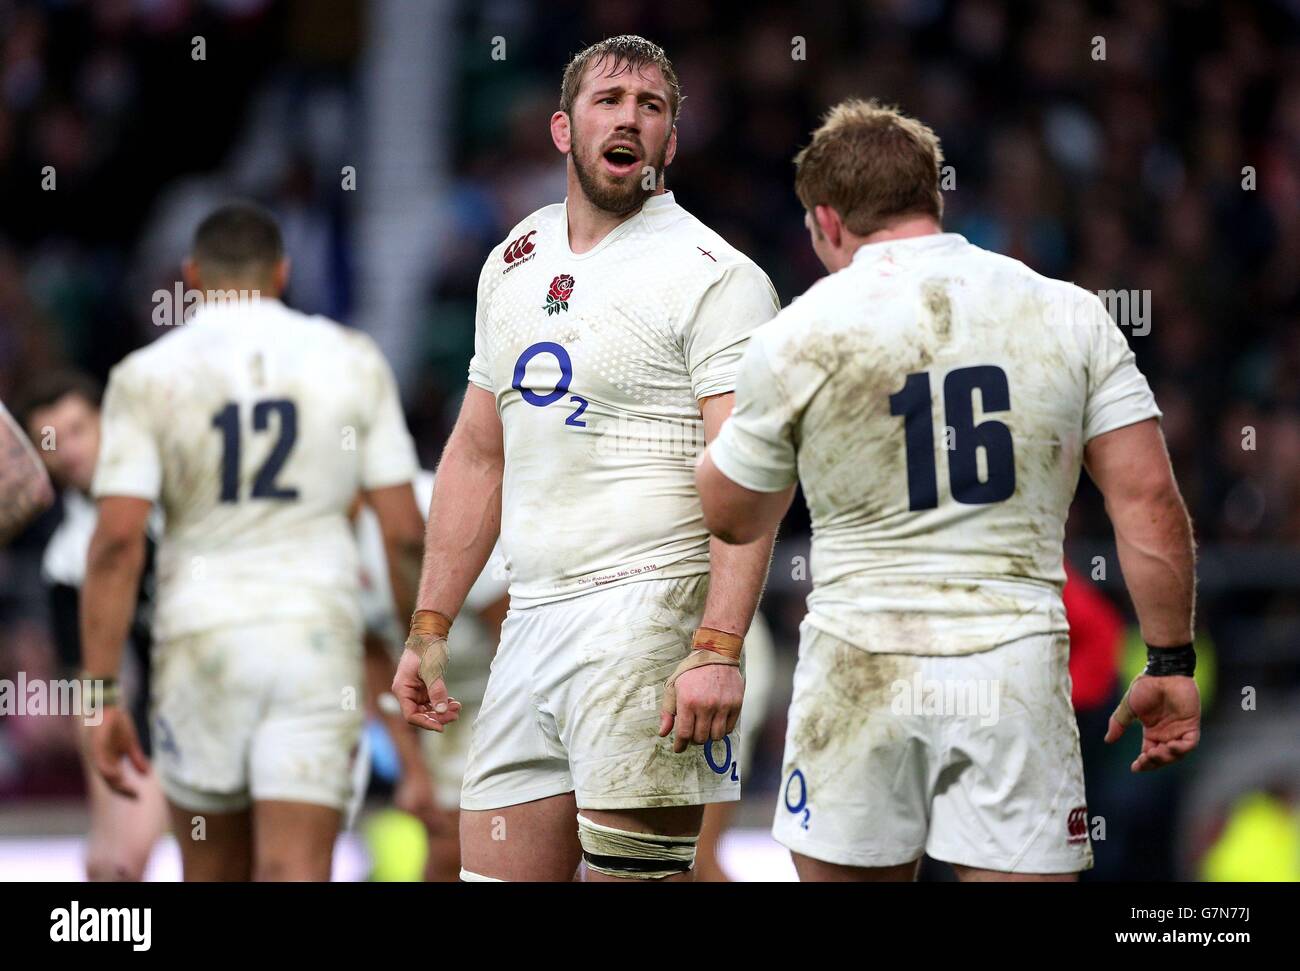 Rugby Union - 2015 RBS Six Nations - England v Italy - Twickenham. England captain Chris Robshaw during the 6 Nations match at Twickenham, London. Stock Photo